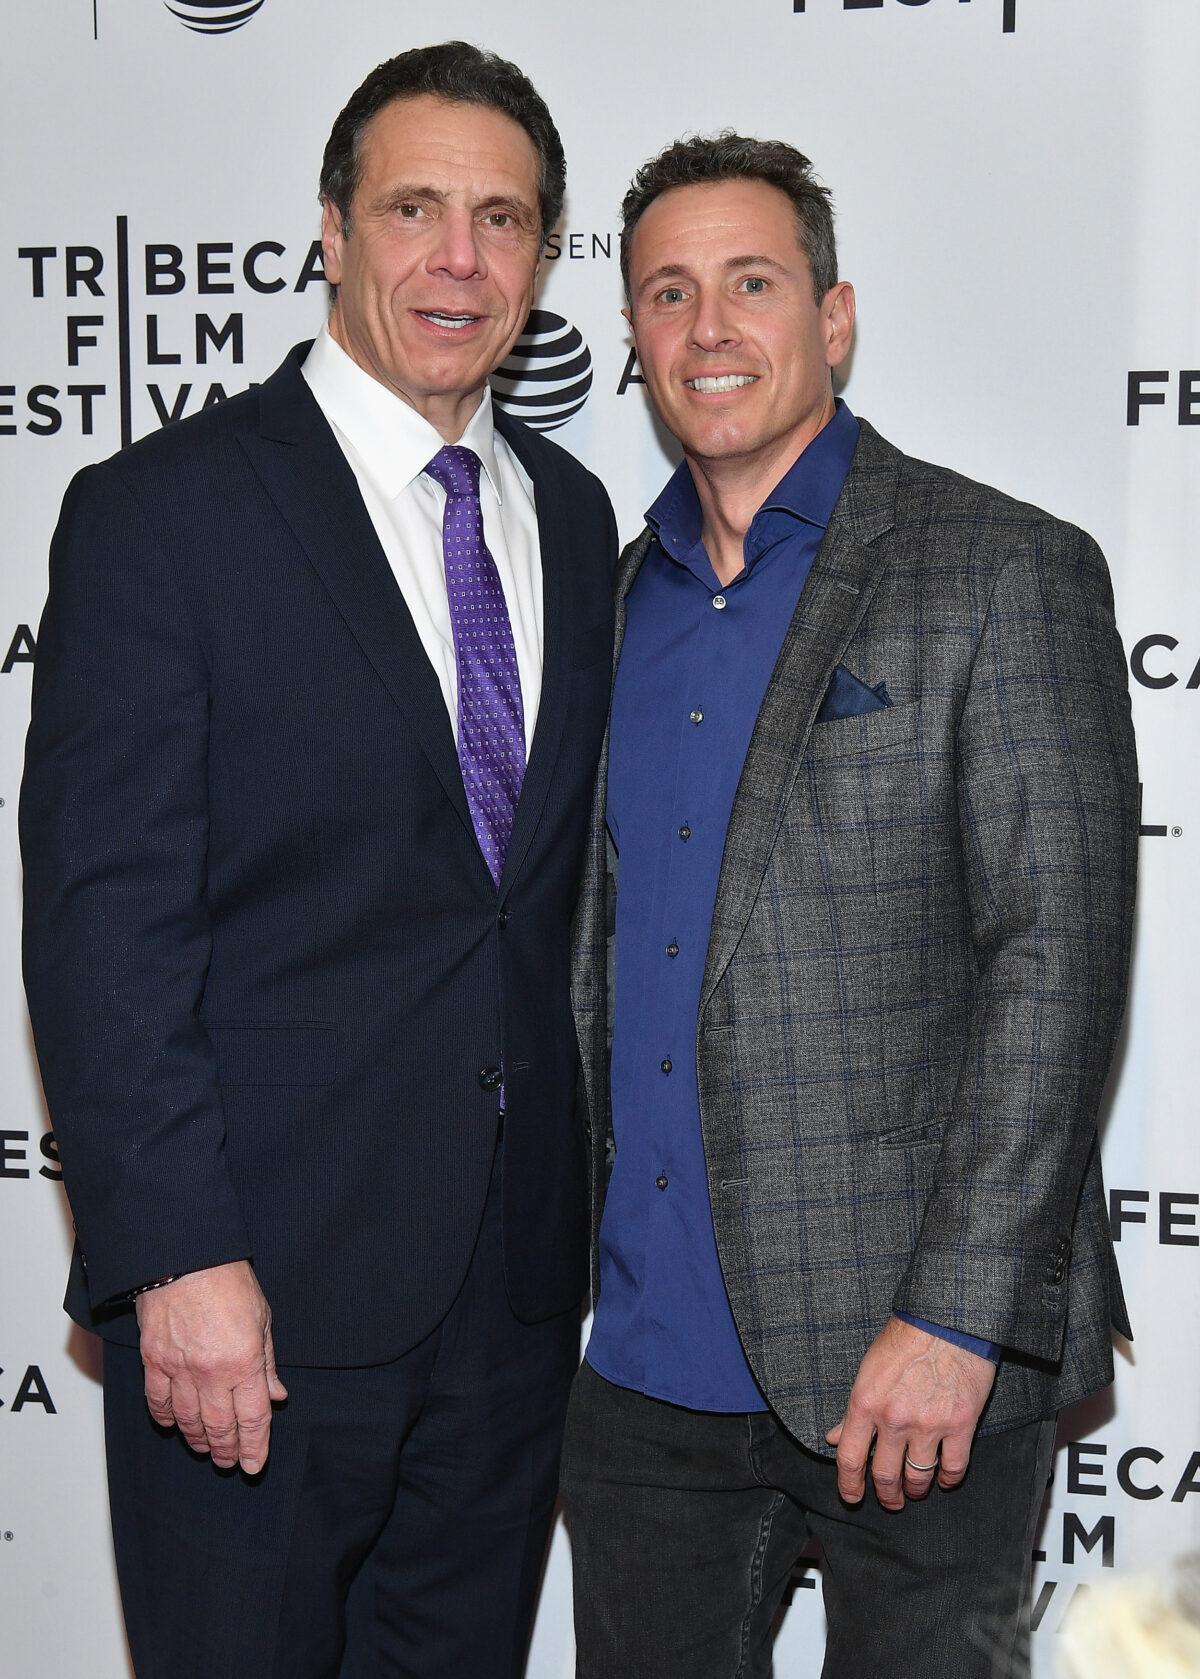 New York Gov. Andrew Cuomo (L) and his brother Chris Cuomo, a CNN anchor, at an event in New York City in 2018. (Dia Dipasupil/Getty Images for Tribeca Film Festival)